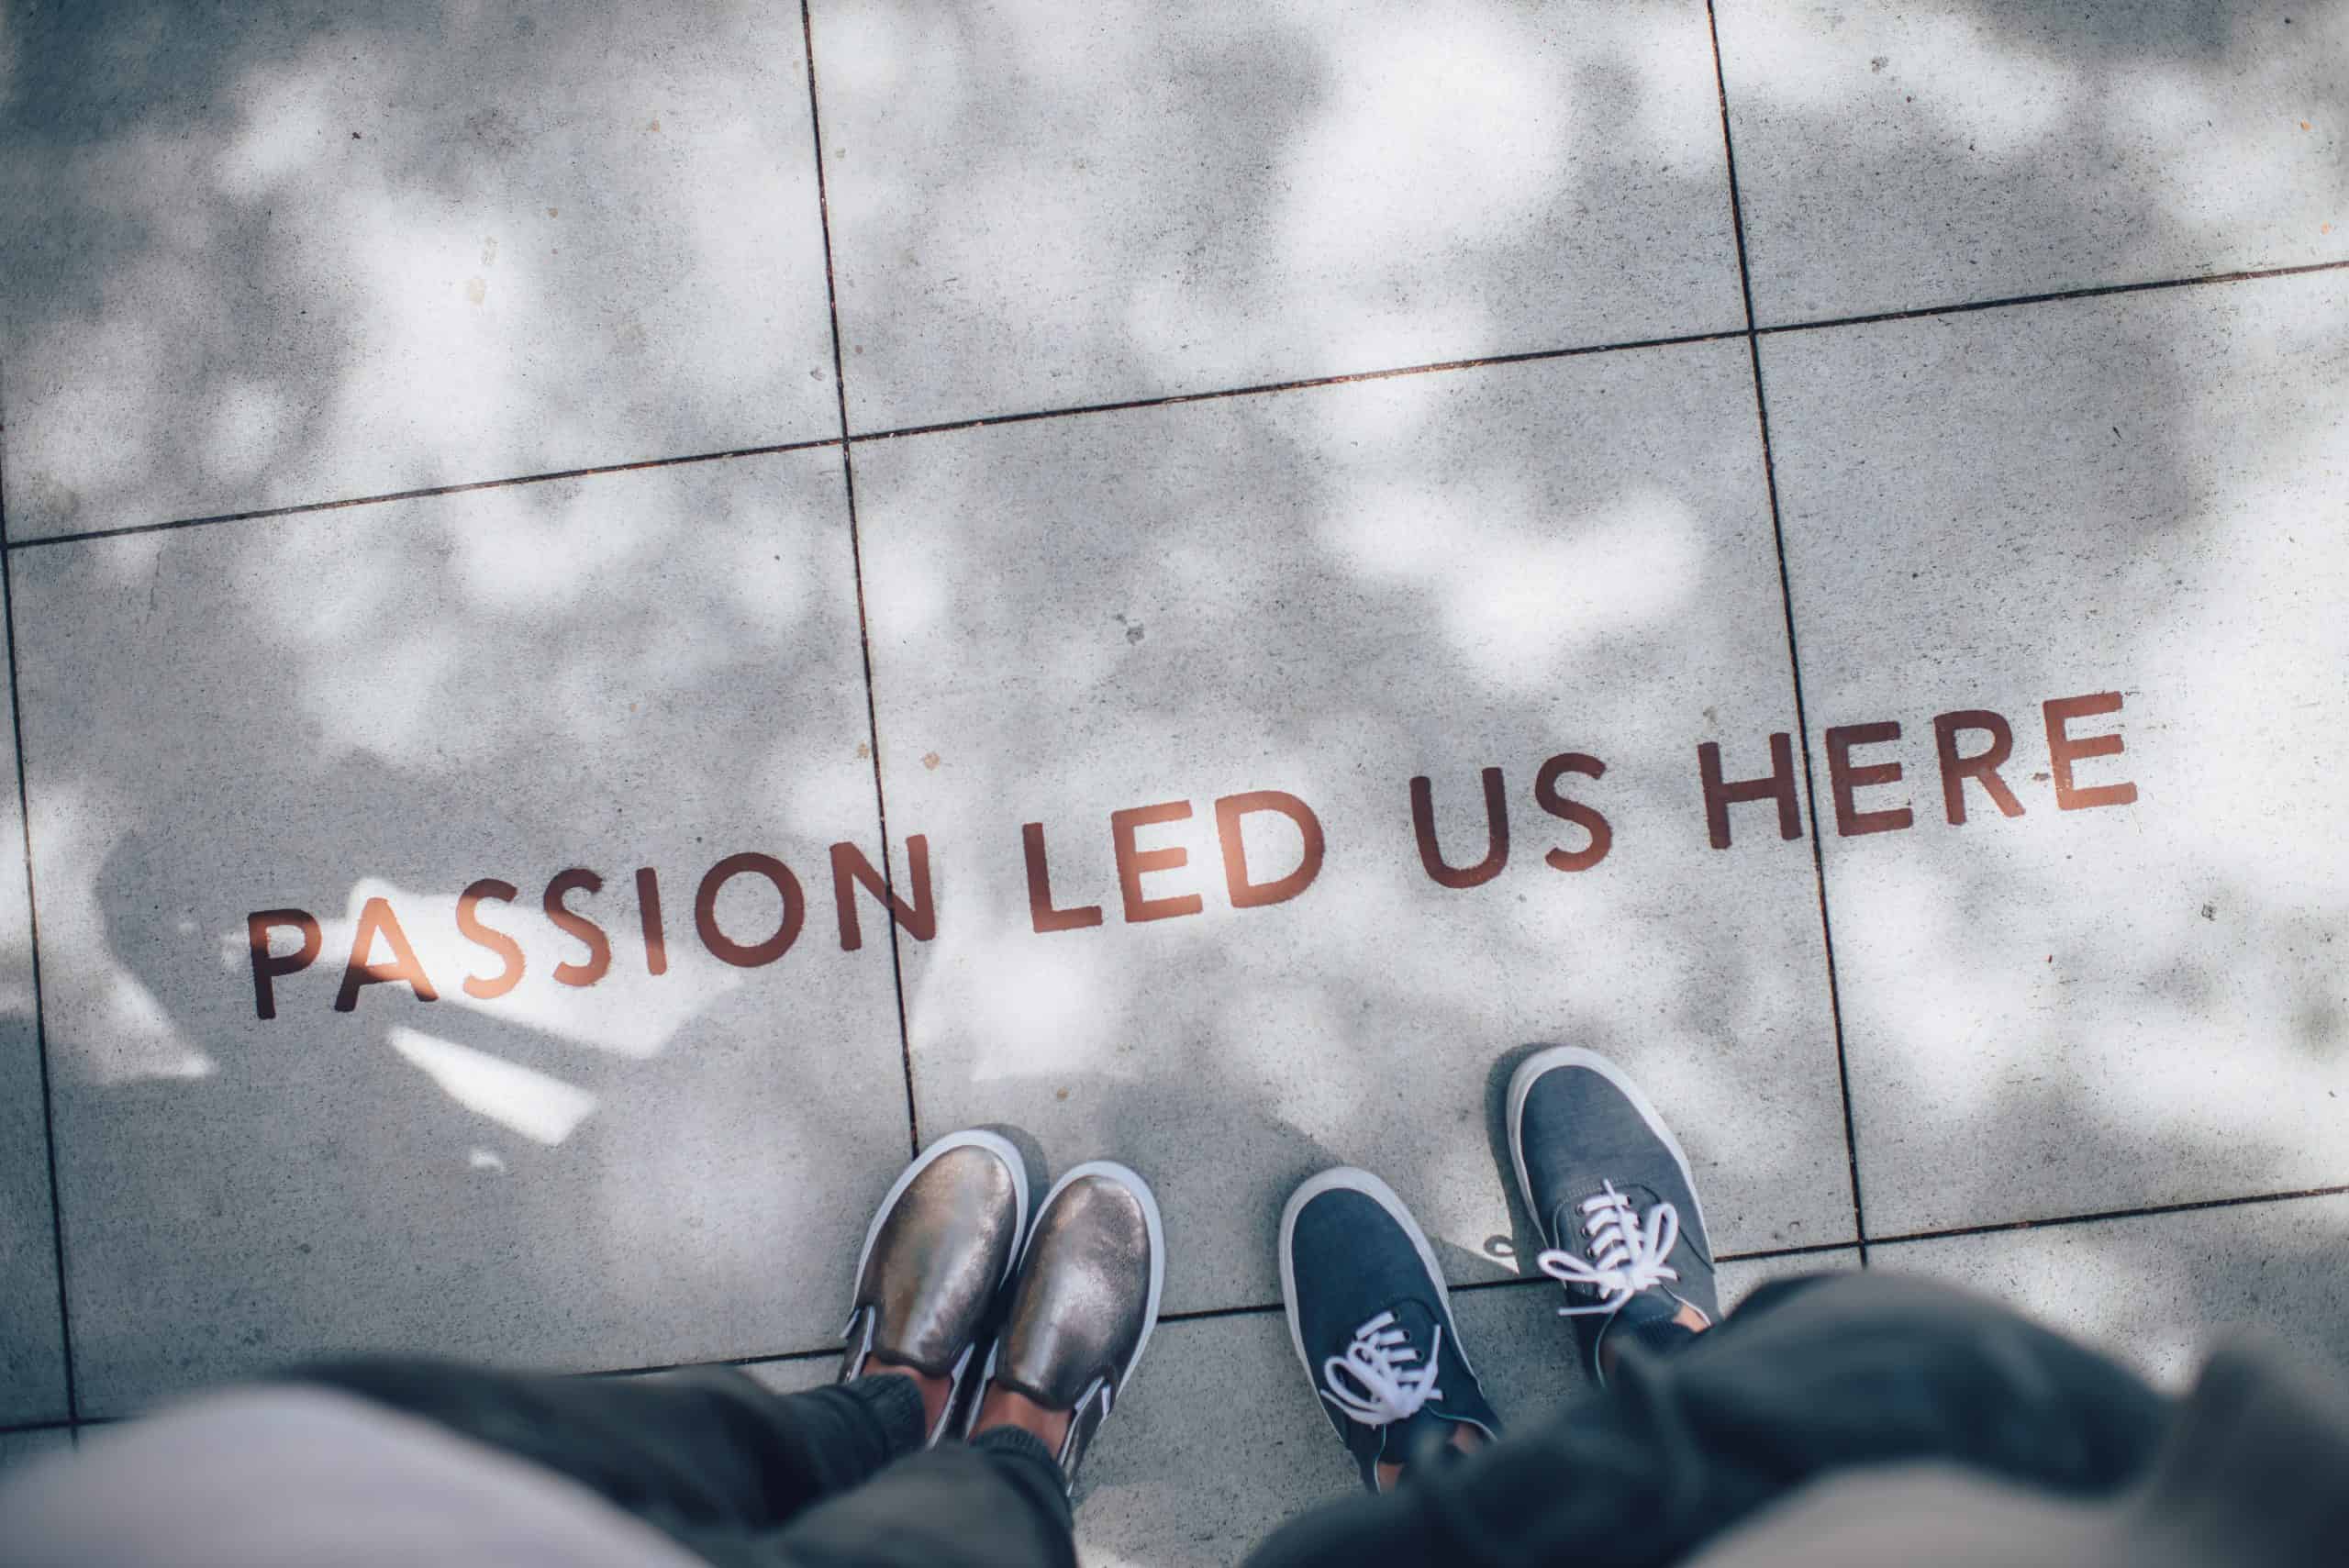 2 pairs of shoes with a sign on the floor that says "Passion led us here"